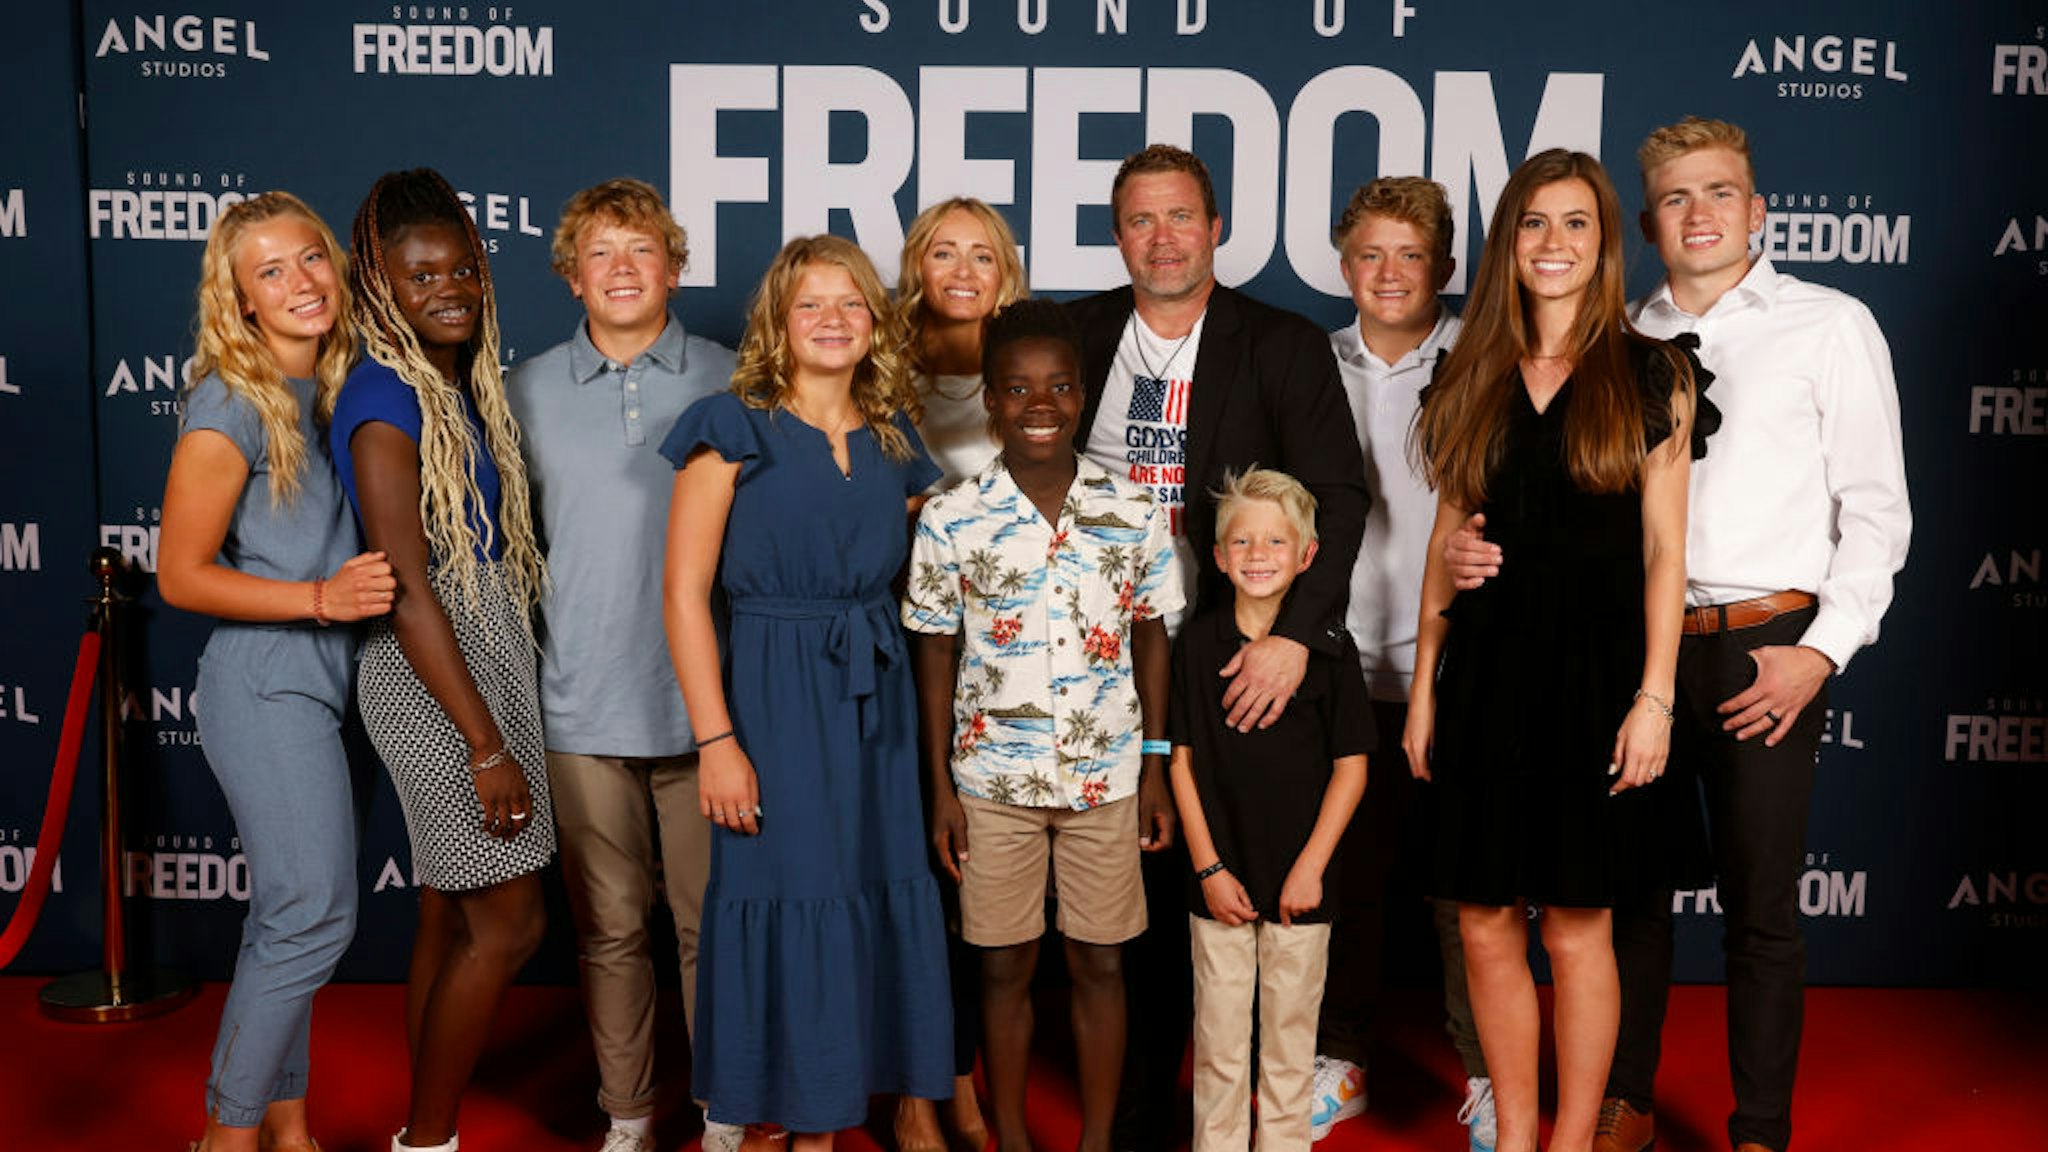 VINEYARD, UTAH - JUNE 28: Tim Ballard poses with friends and family during the premiere of "Sound of Freedom" on June 28, 2023 in Vineyard, Utah. (Photo by Fred Hayes/Getty Images for Angel Studios)